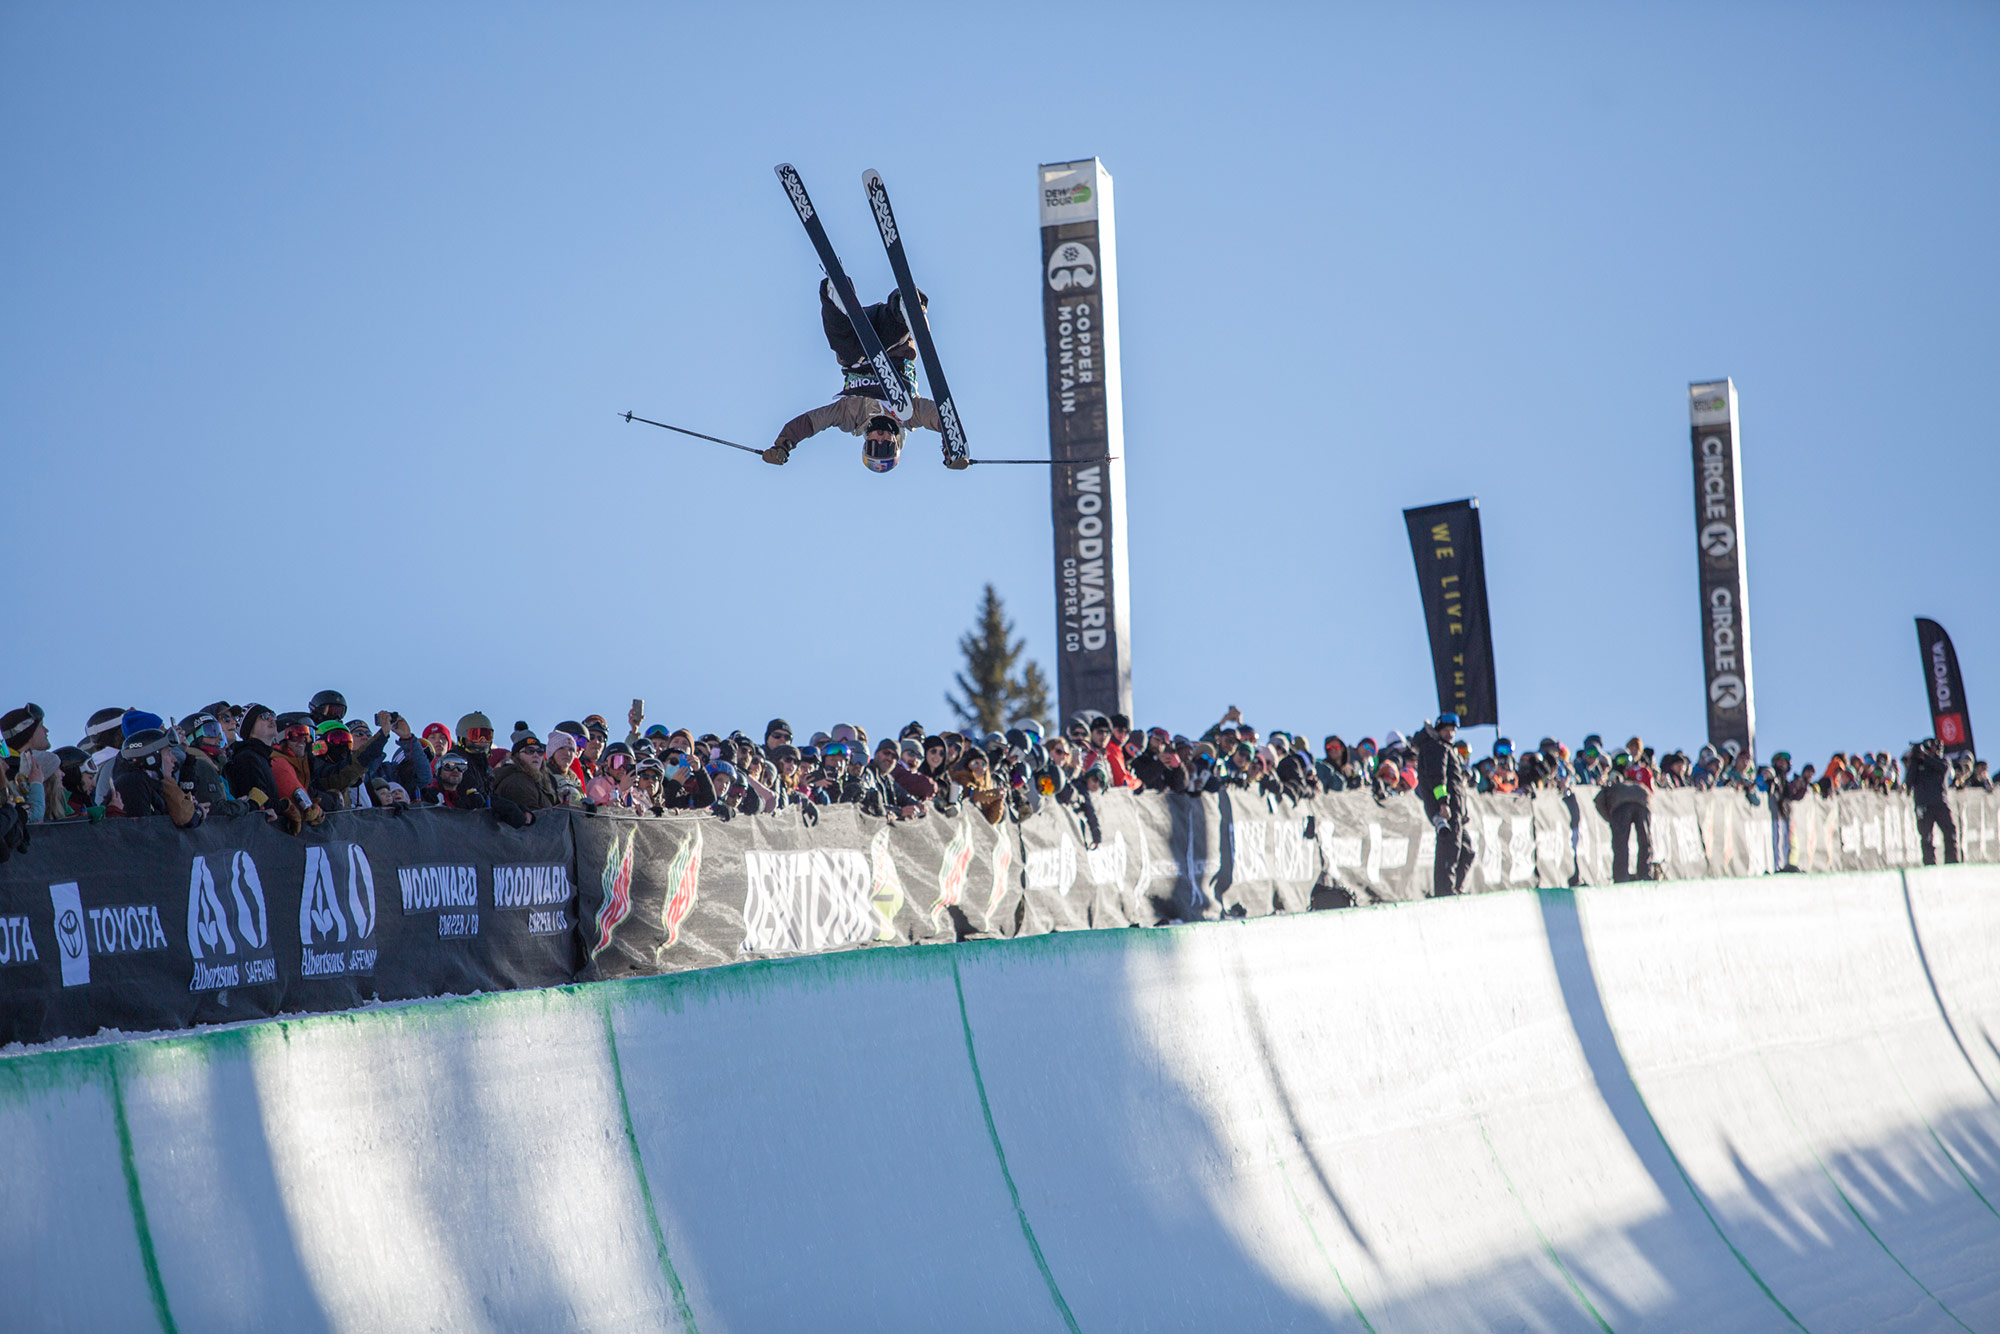 Birk Irving competes in mens halfpipe finals at the 2021 Winter Dew Tour